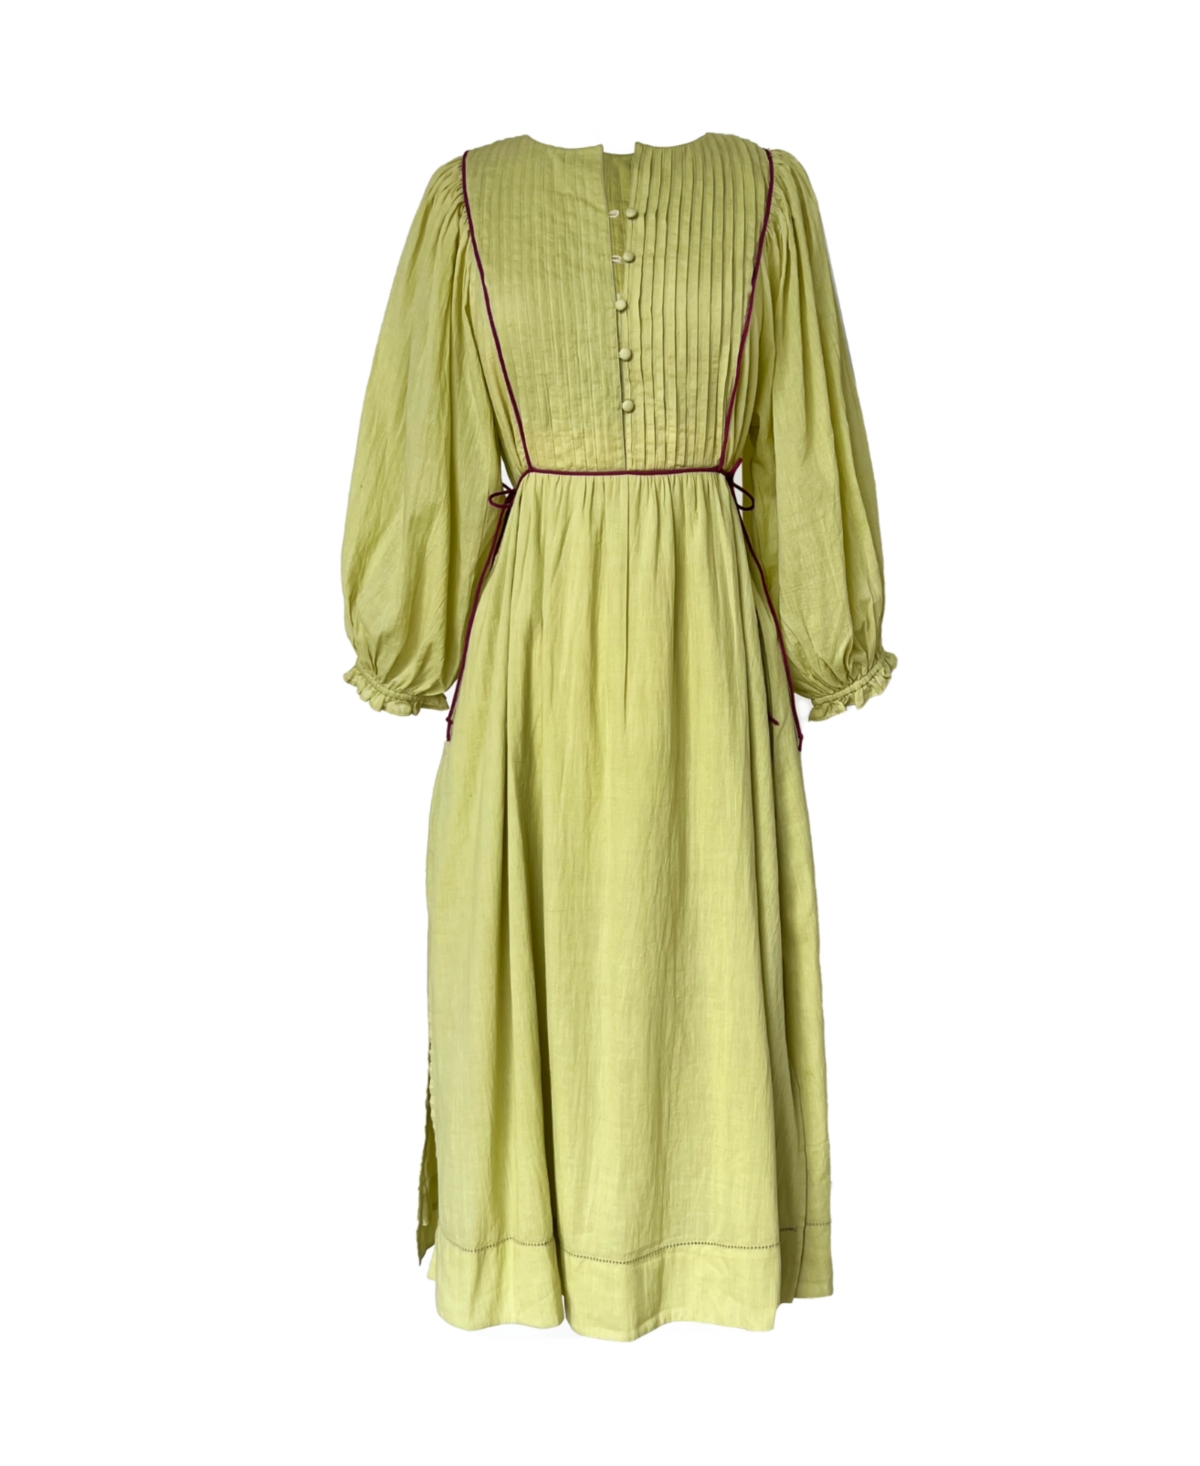 Mallie Dress in Chartreuse and Violet - Chartreuse and violet